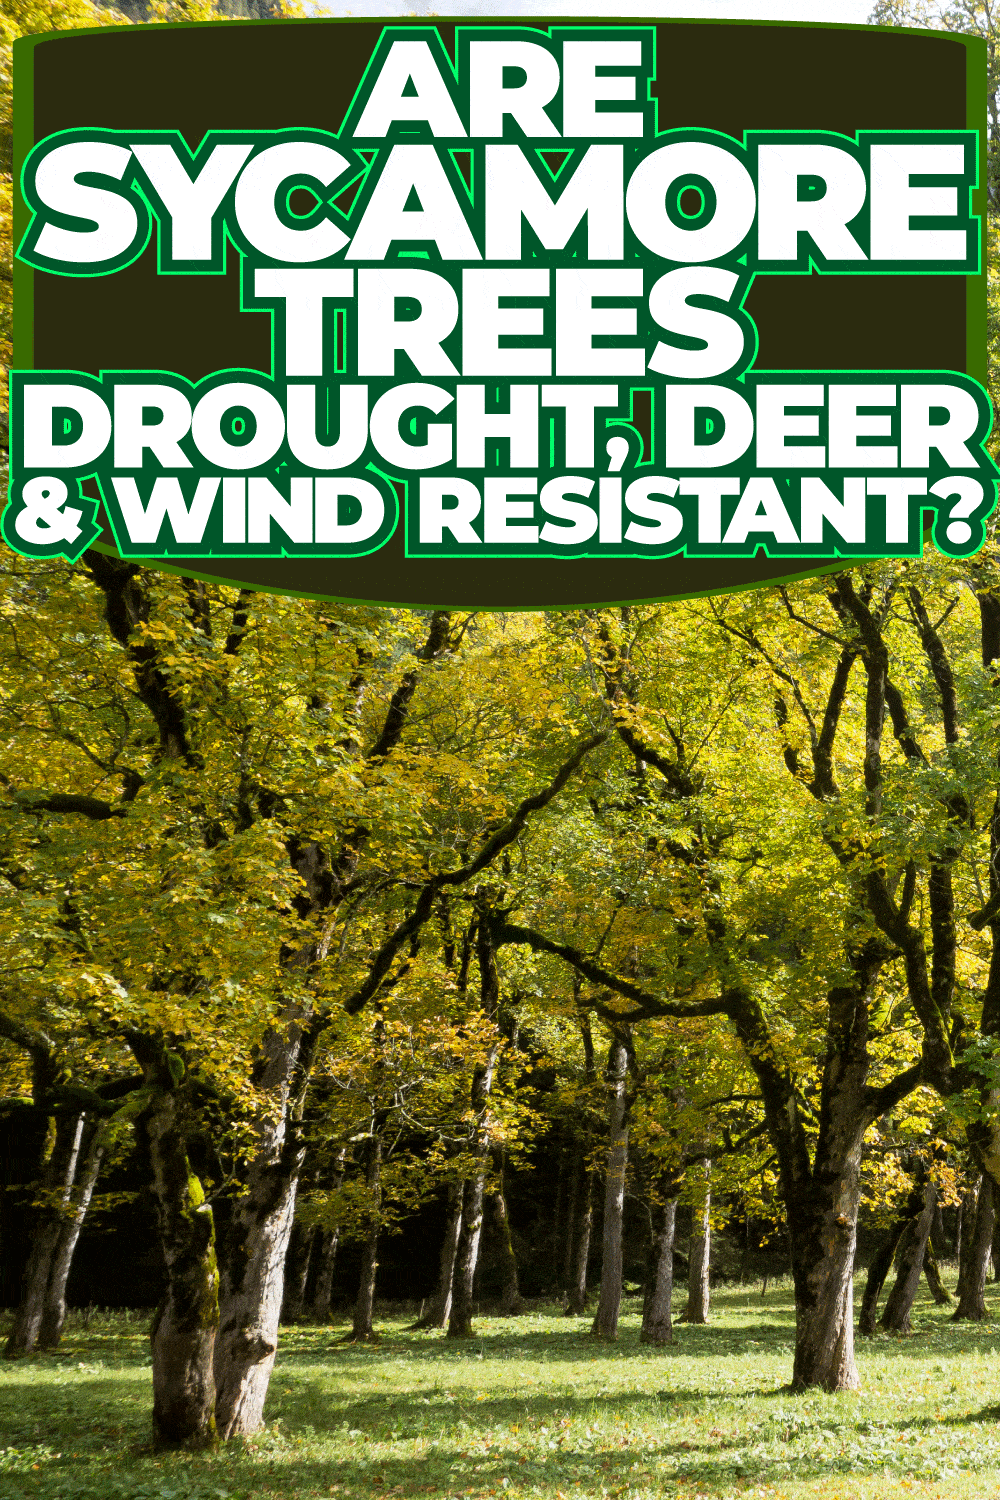 Are Sycamore Trees Drought, Deer, & Wind Resistant?